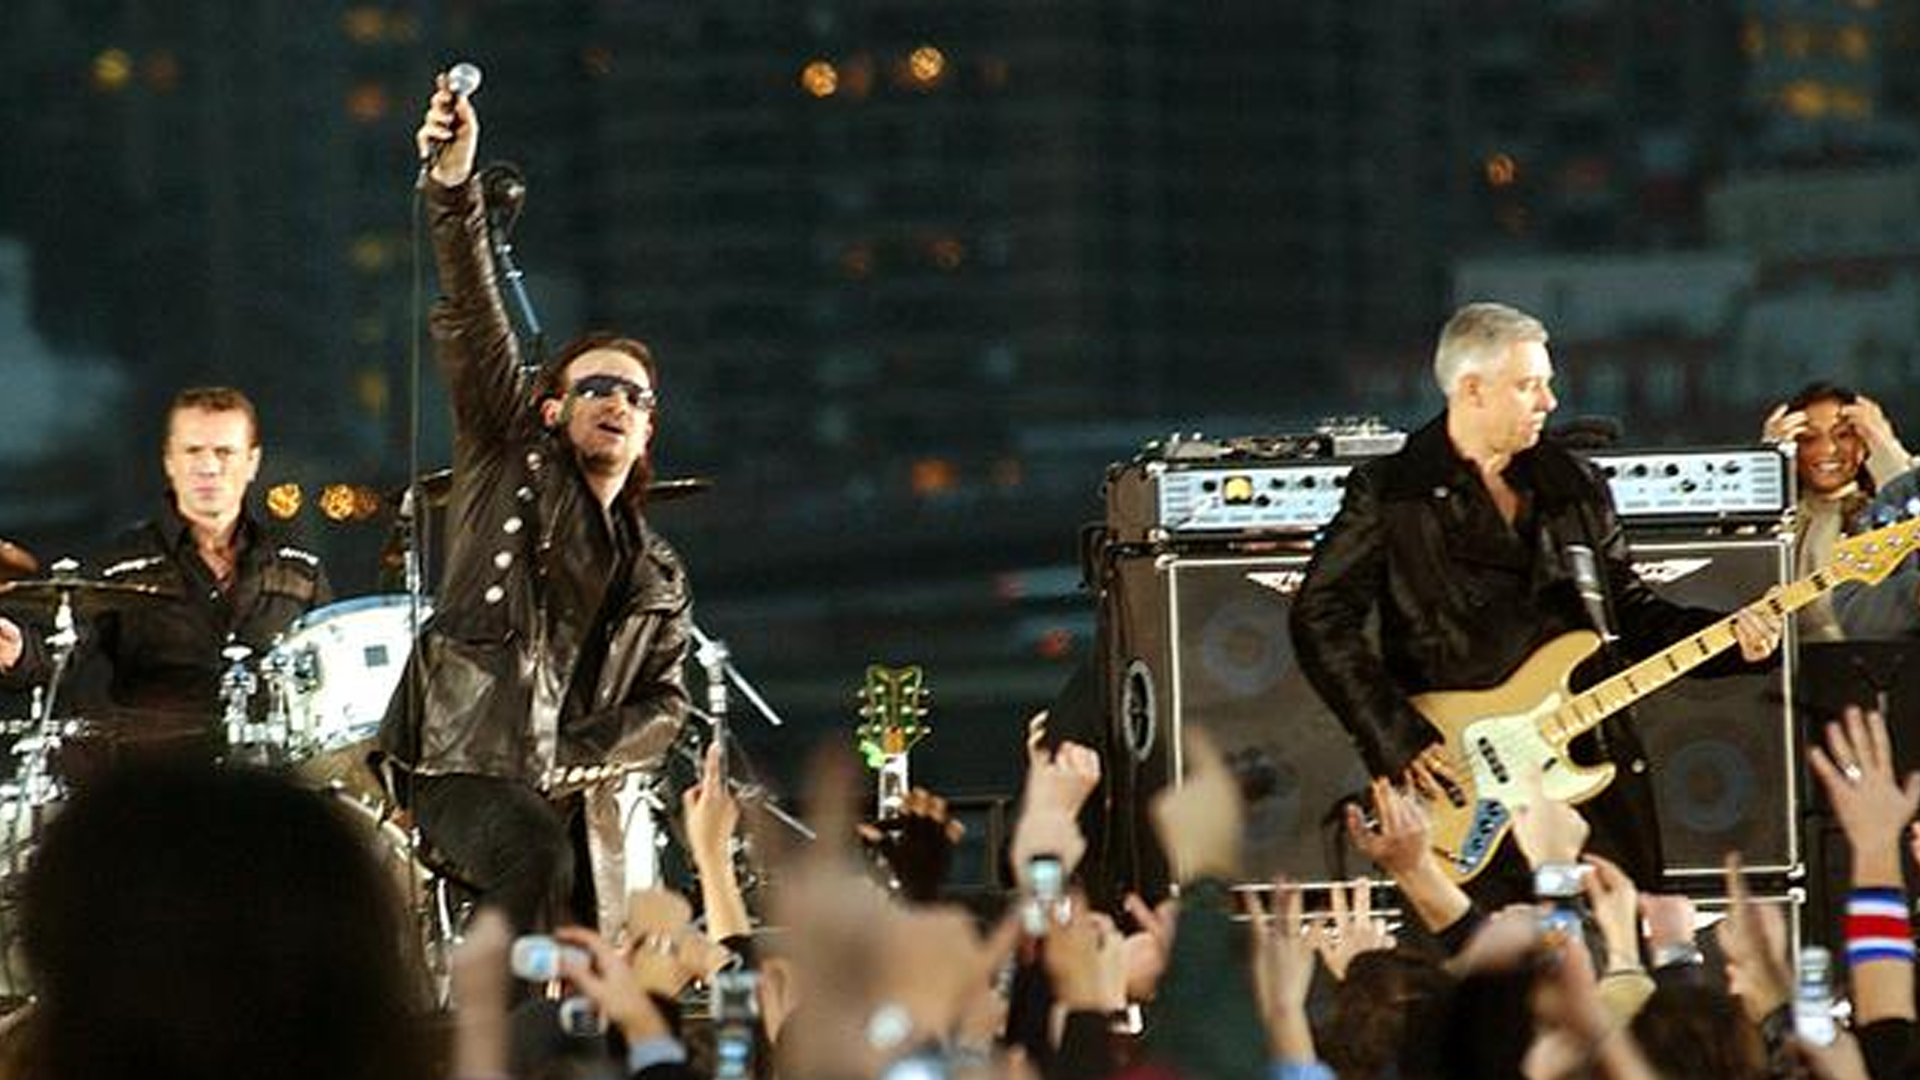 U2 cancels concert Saturday night in St. Louis because of protests